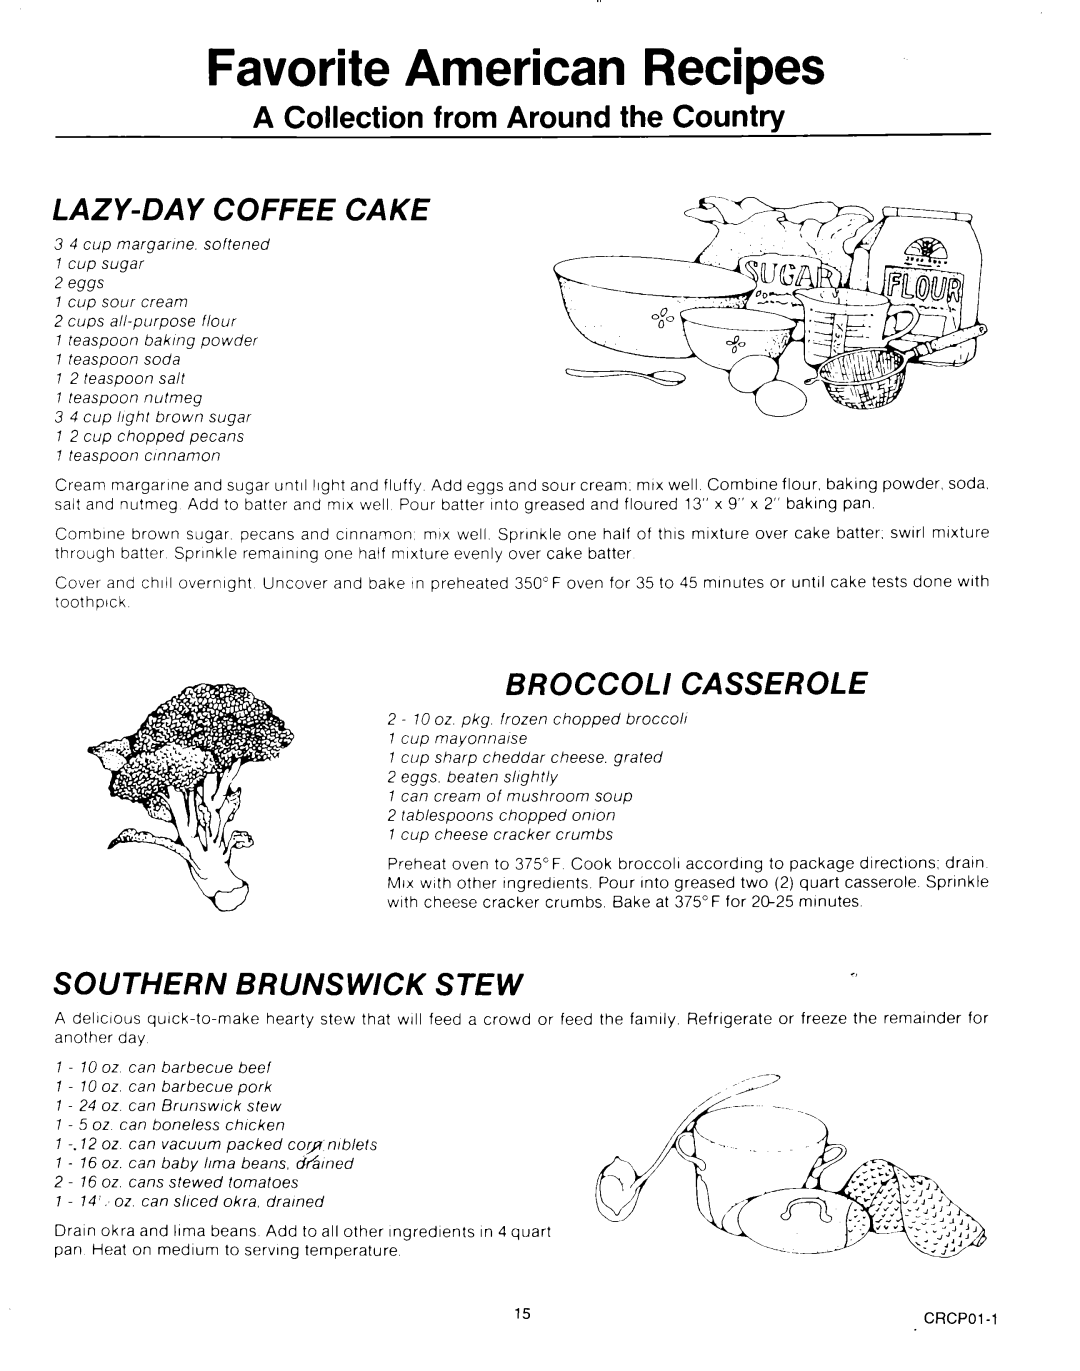 Roper MN11020(344197), B875 manual Favorite American Recipes, A Collection from Around the Country, Lazy-Daycoffee Cake 